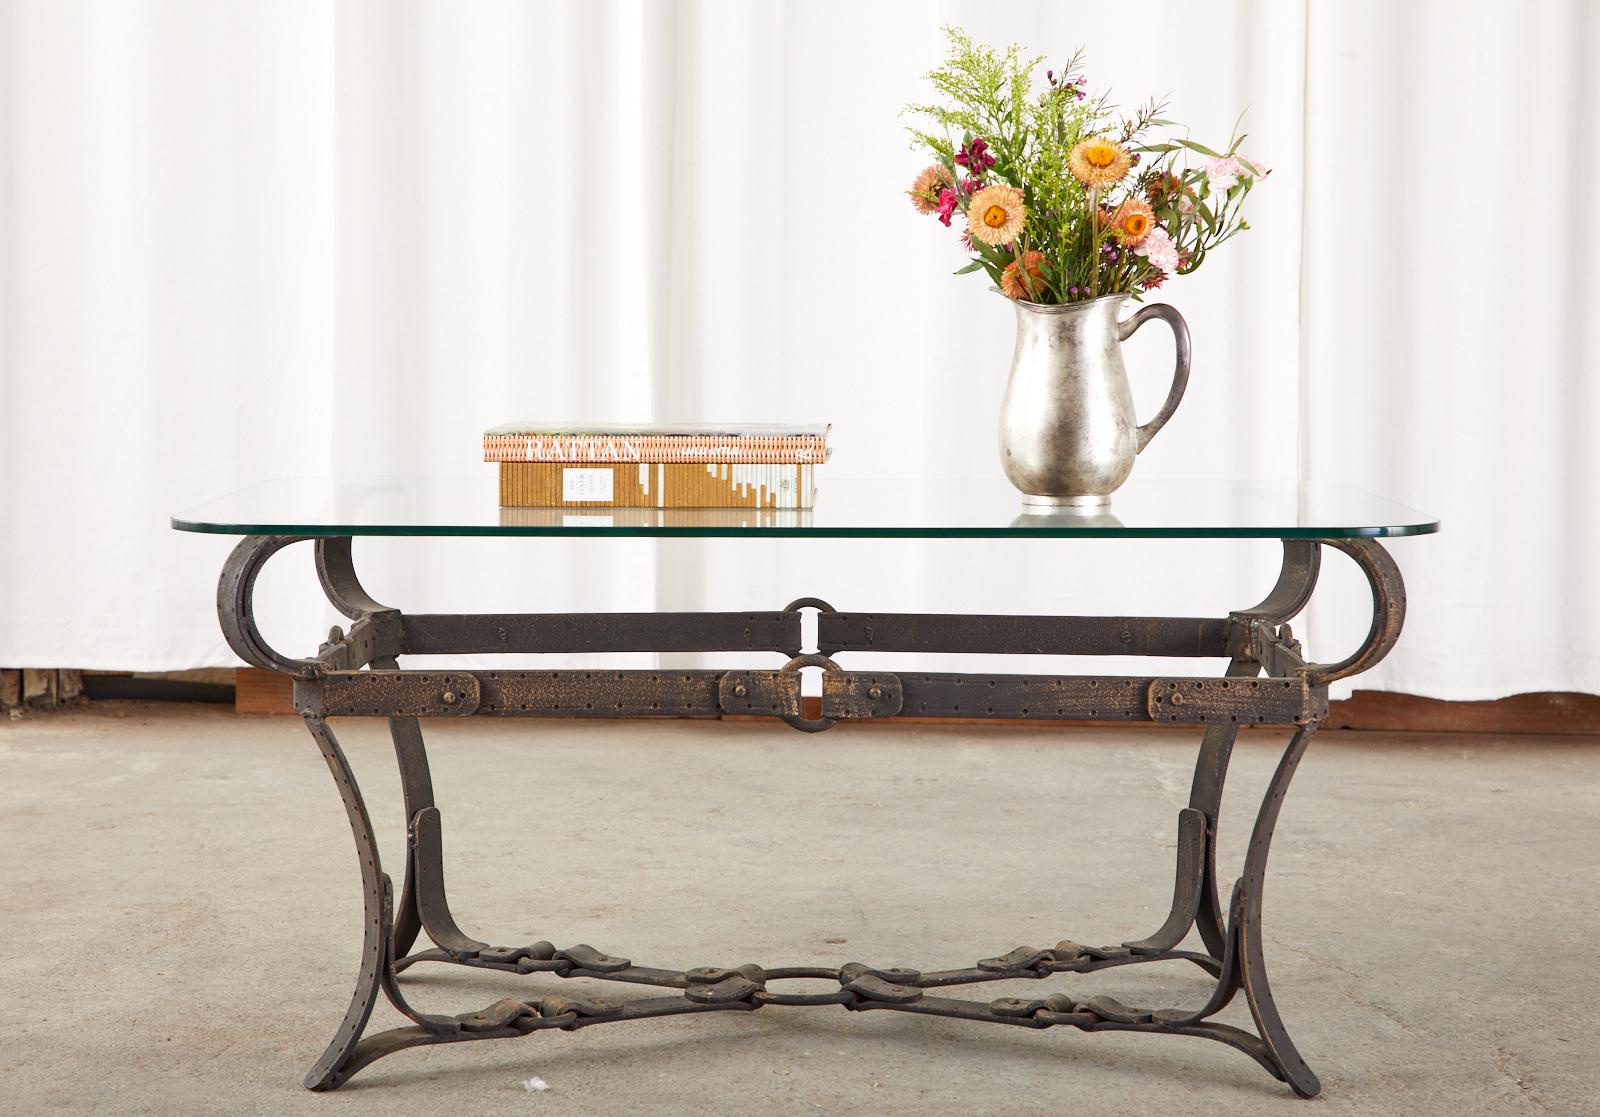 Mid-Century Modern cast iron coffee or cocktail table featuring a faux leather equestrian strap design in the manner and style of Jacques Adnet and Hermes. Beautifully crafted to resemble leather equestrian harness straps, rings, and buckles with a